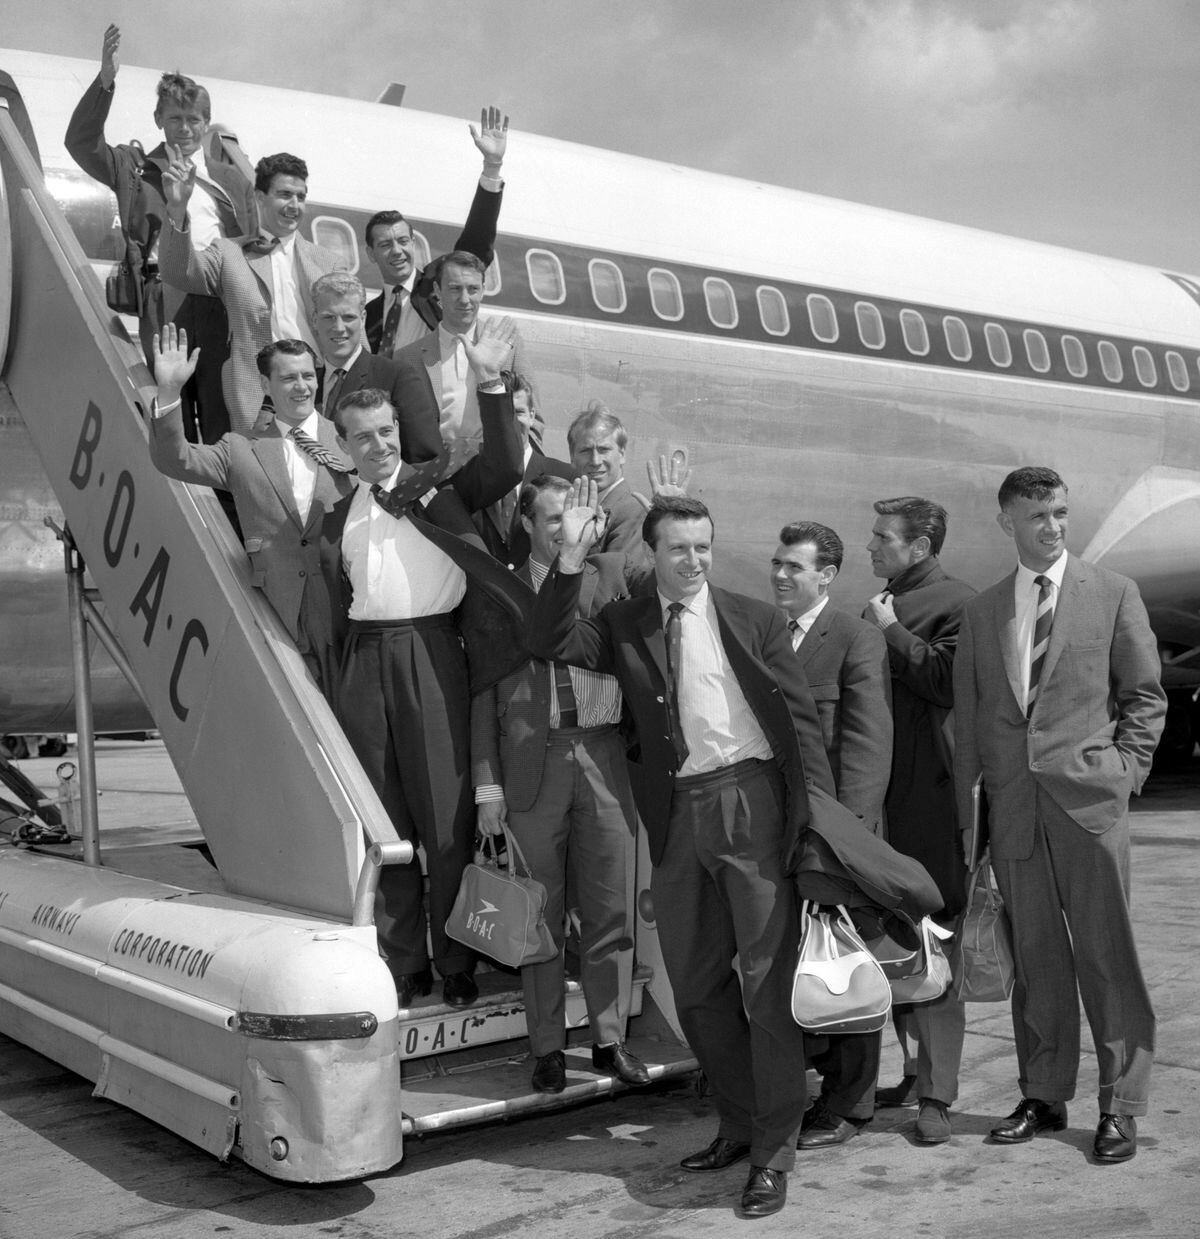 Their hopes soaring, England's World Cup footballers wave before leaving London Airport this morning (Thursday) for Chile and the World Cup series. They are due to return to this country in late June...From top: Gerry Hitchins, Stan Anderson, Johnny Haynes, Ron Flowers (left), Jimmy Greaves (right), Bobby Robson, Peter Swan, Ron Springett (face hidden), Bobby Charlton, Ray Wilson (face hidden), Jimmy Armfield, John Connolly, Alan Peacock and Bobby Smith..